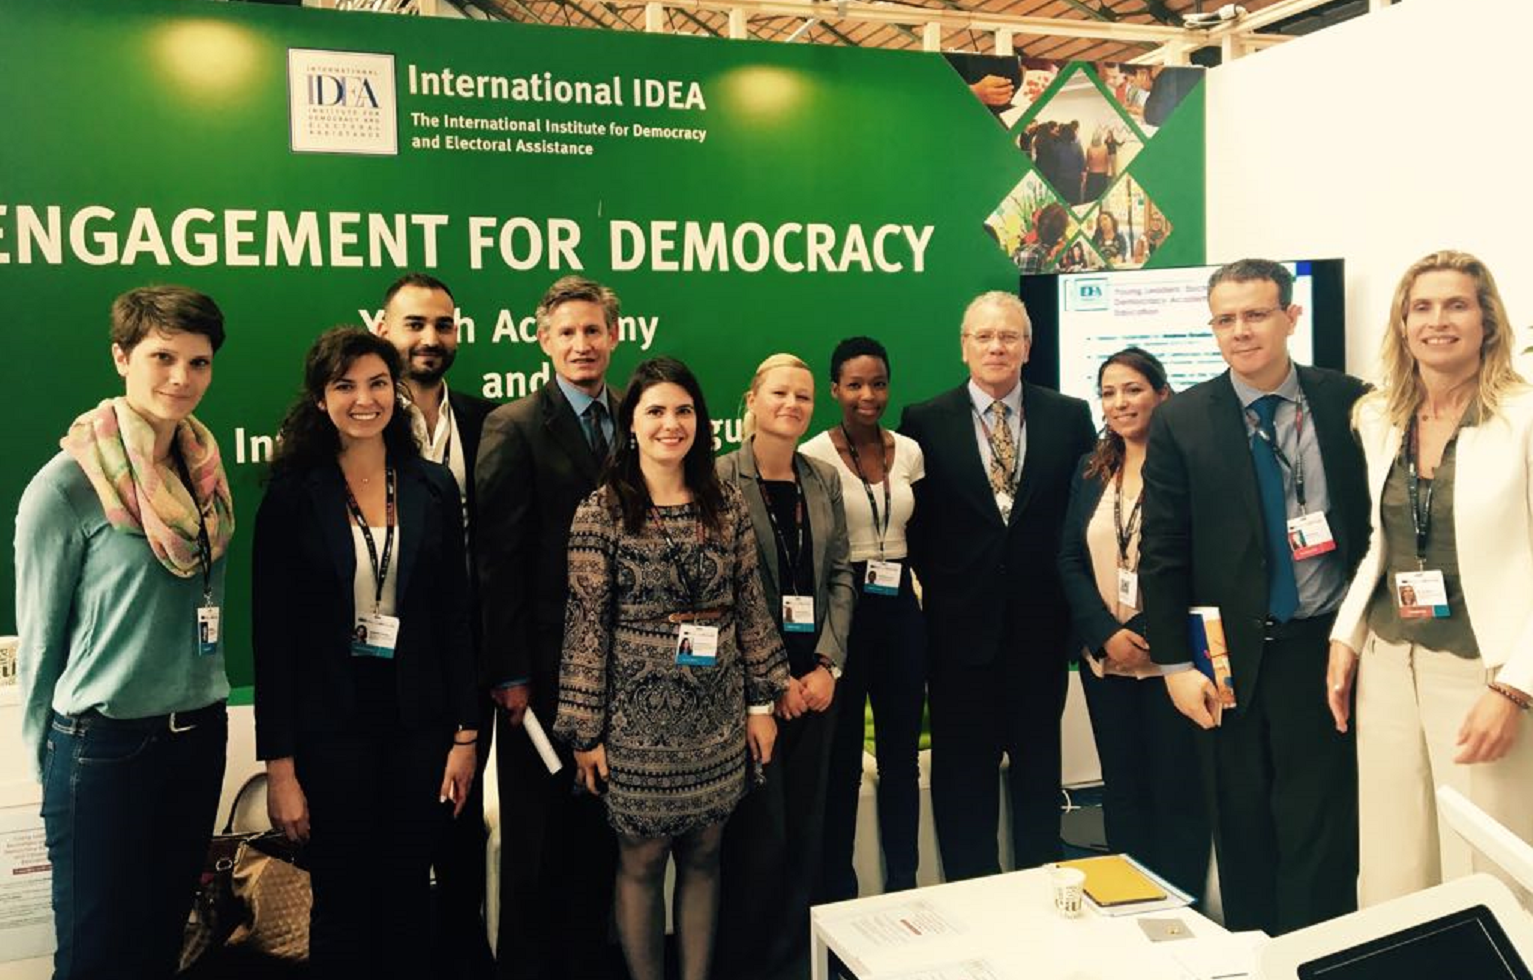 Opening ceremony of the International IDEA stand, group picture with International IDEA staff, H.E. Mr. Gonzalo Gutiérrez, Ambassador of Peru in Brussels, Mr. Hamed Zekri, Councellor at the Embassy of Tunisia in Brussels, and stand visitors.